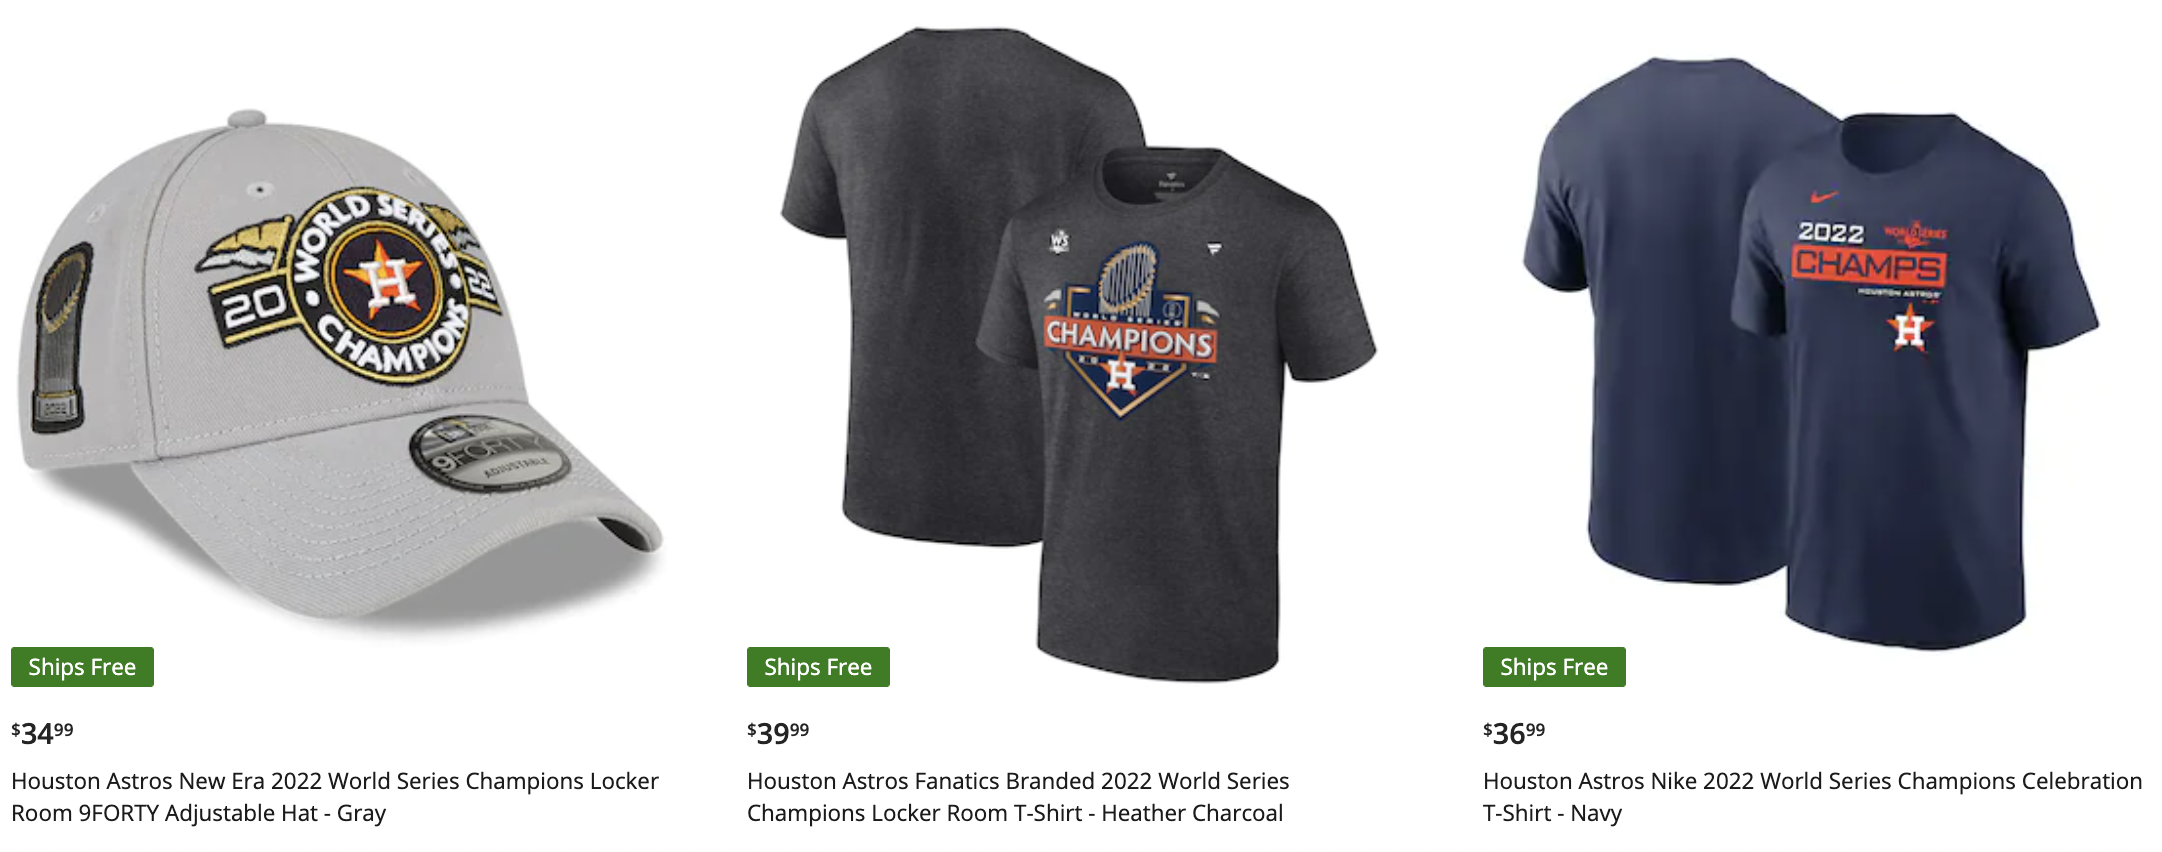 Gear up, Astros fans! ⚾ New ALCS merch now available after division series  sweep against Seattle